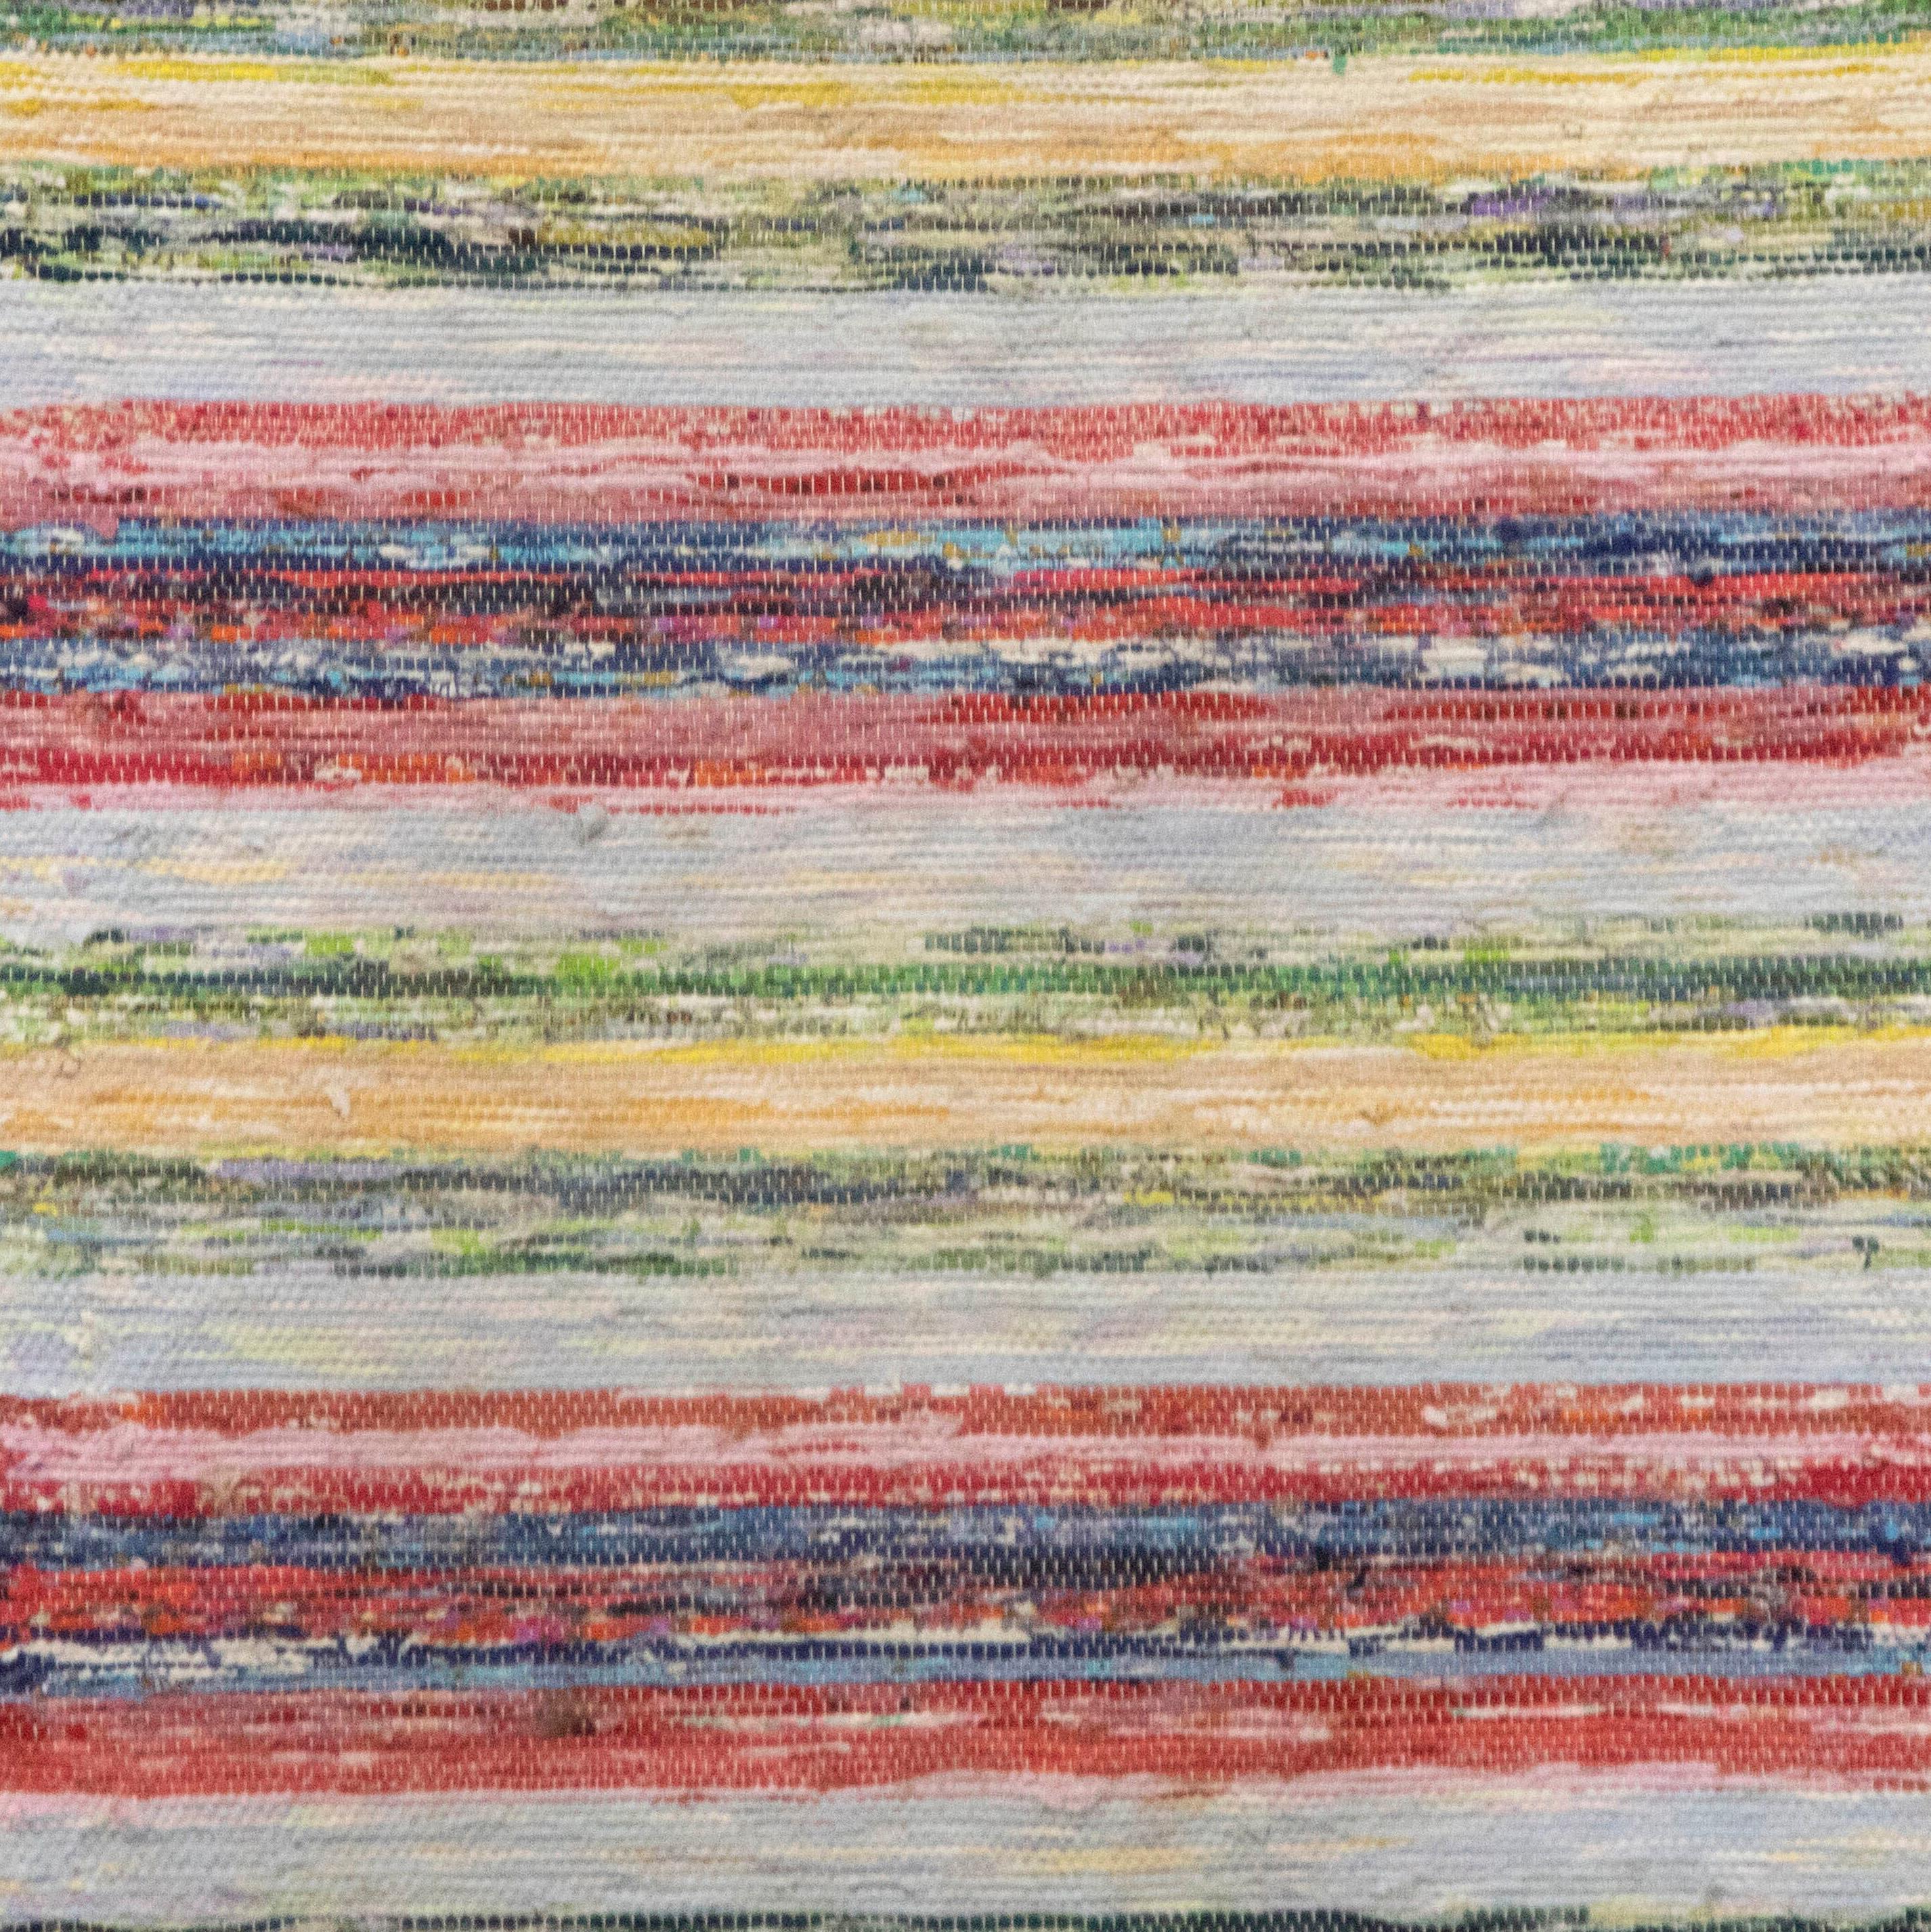 20th Century Swedish rag rug. Featuring a stripe design in tones of green, yellow, blue, and red. This rug is machine washable at 30 degrees.
RT6024592